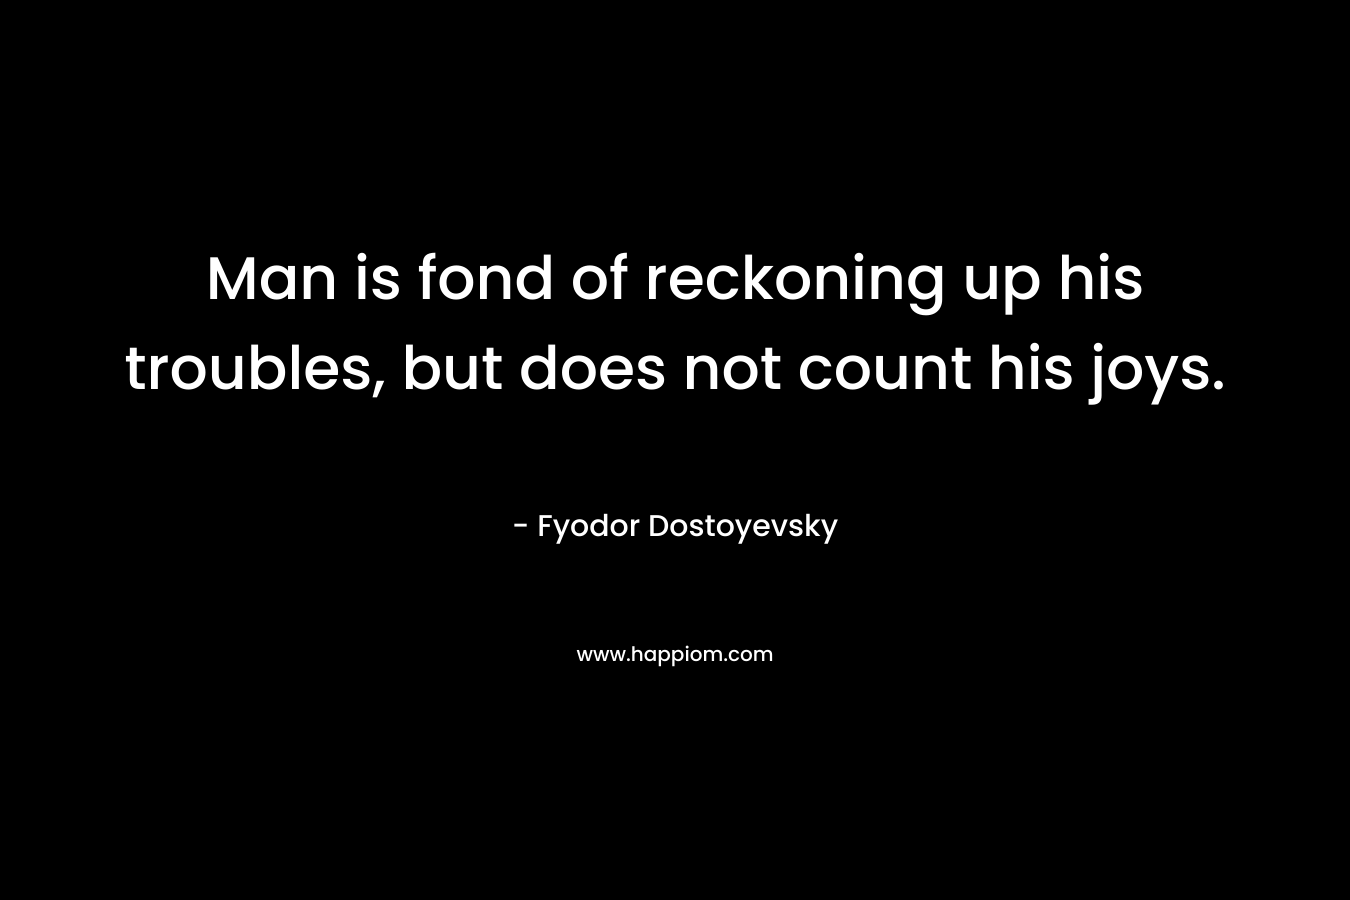 Man is fond of reckoning up his troubles, but does not count his joys. – Fyodor Dostoyevsky